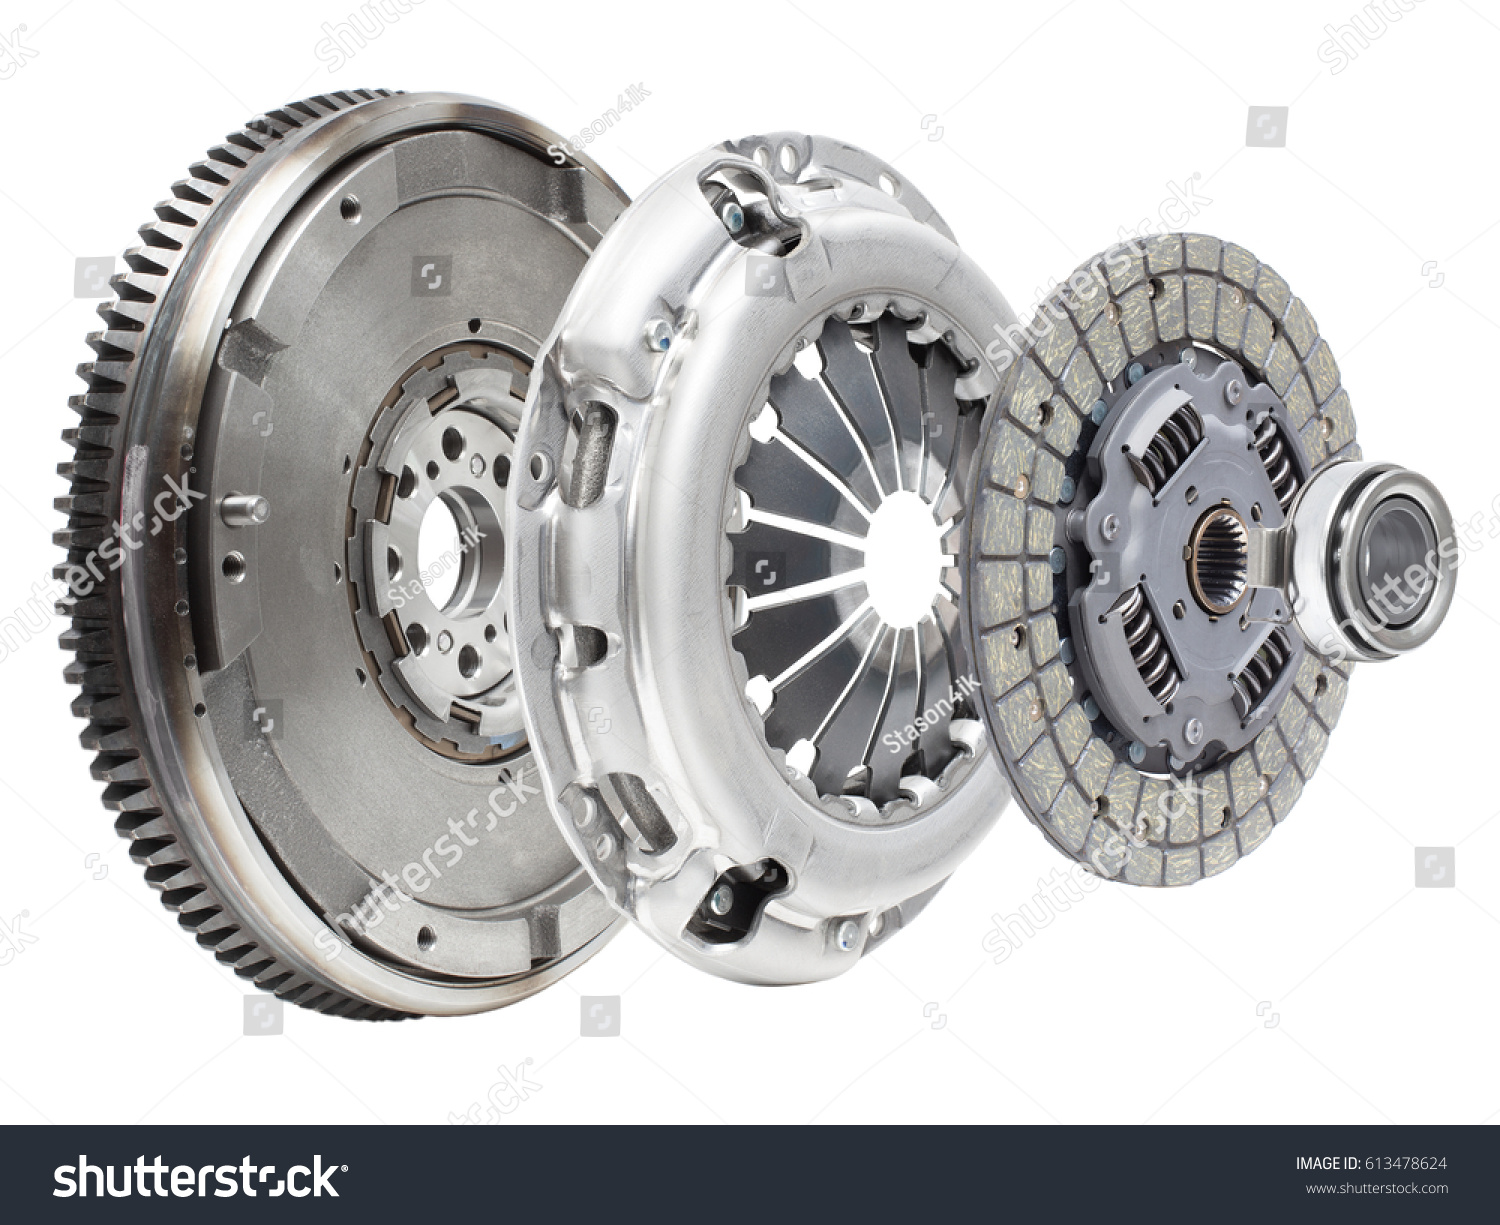 the composition of the elements of car repair kit clutch manual gearbox isolated, on a white background #613478624